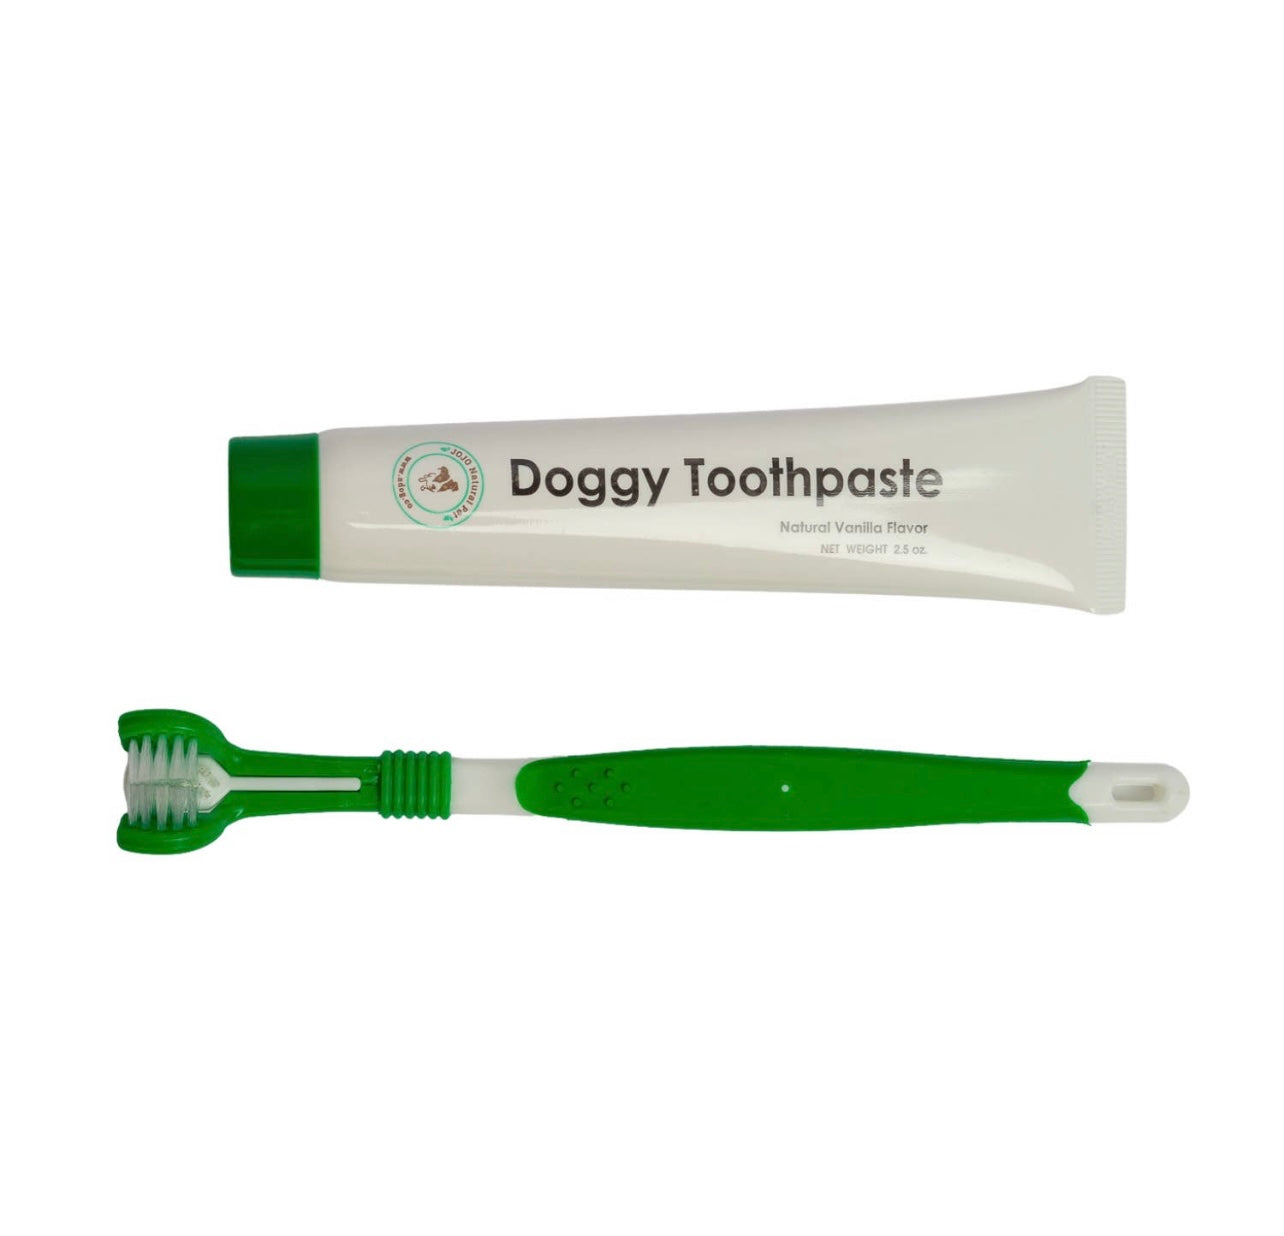 Triple Headed Dog Toothbrush with Natural Toothpaste